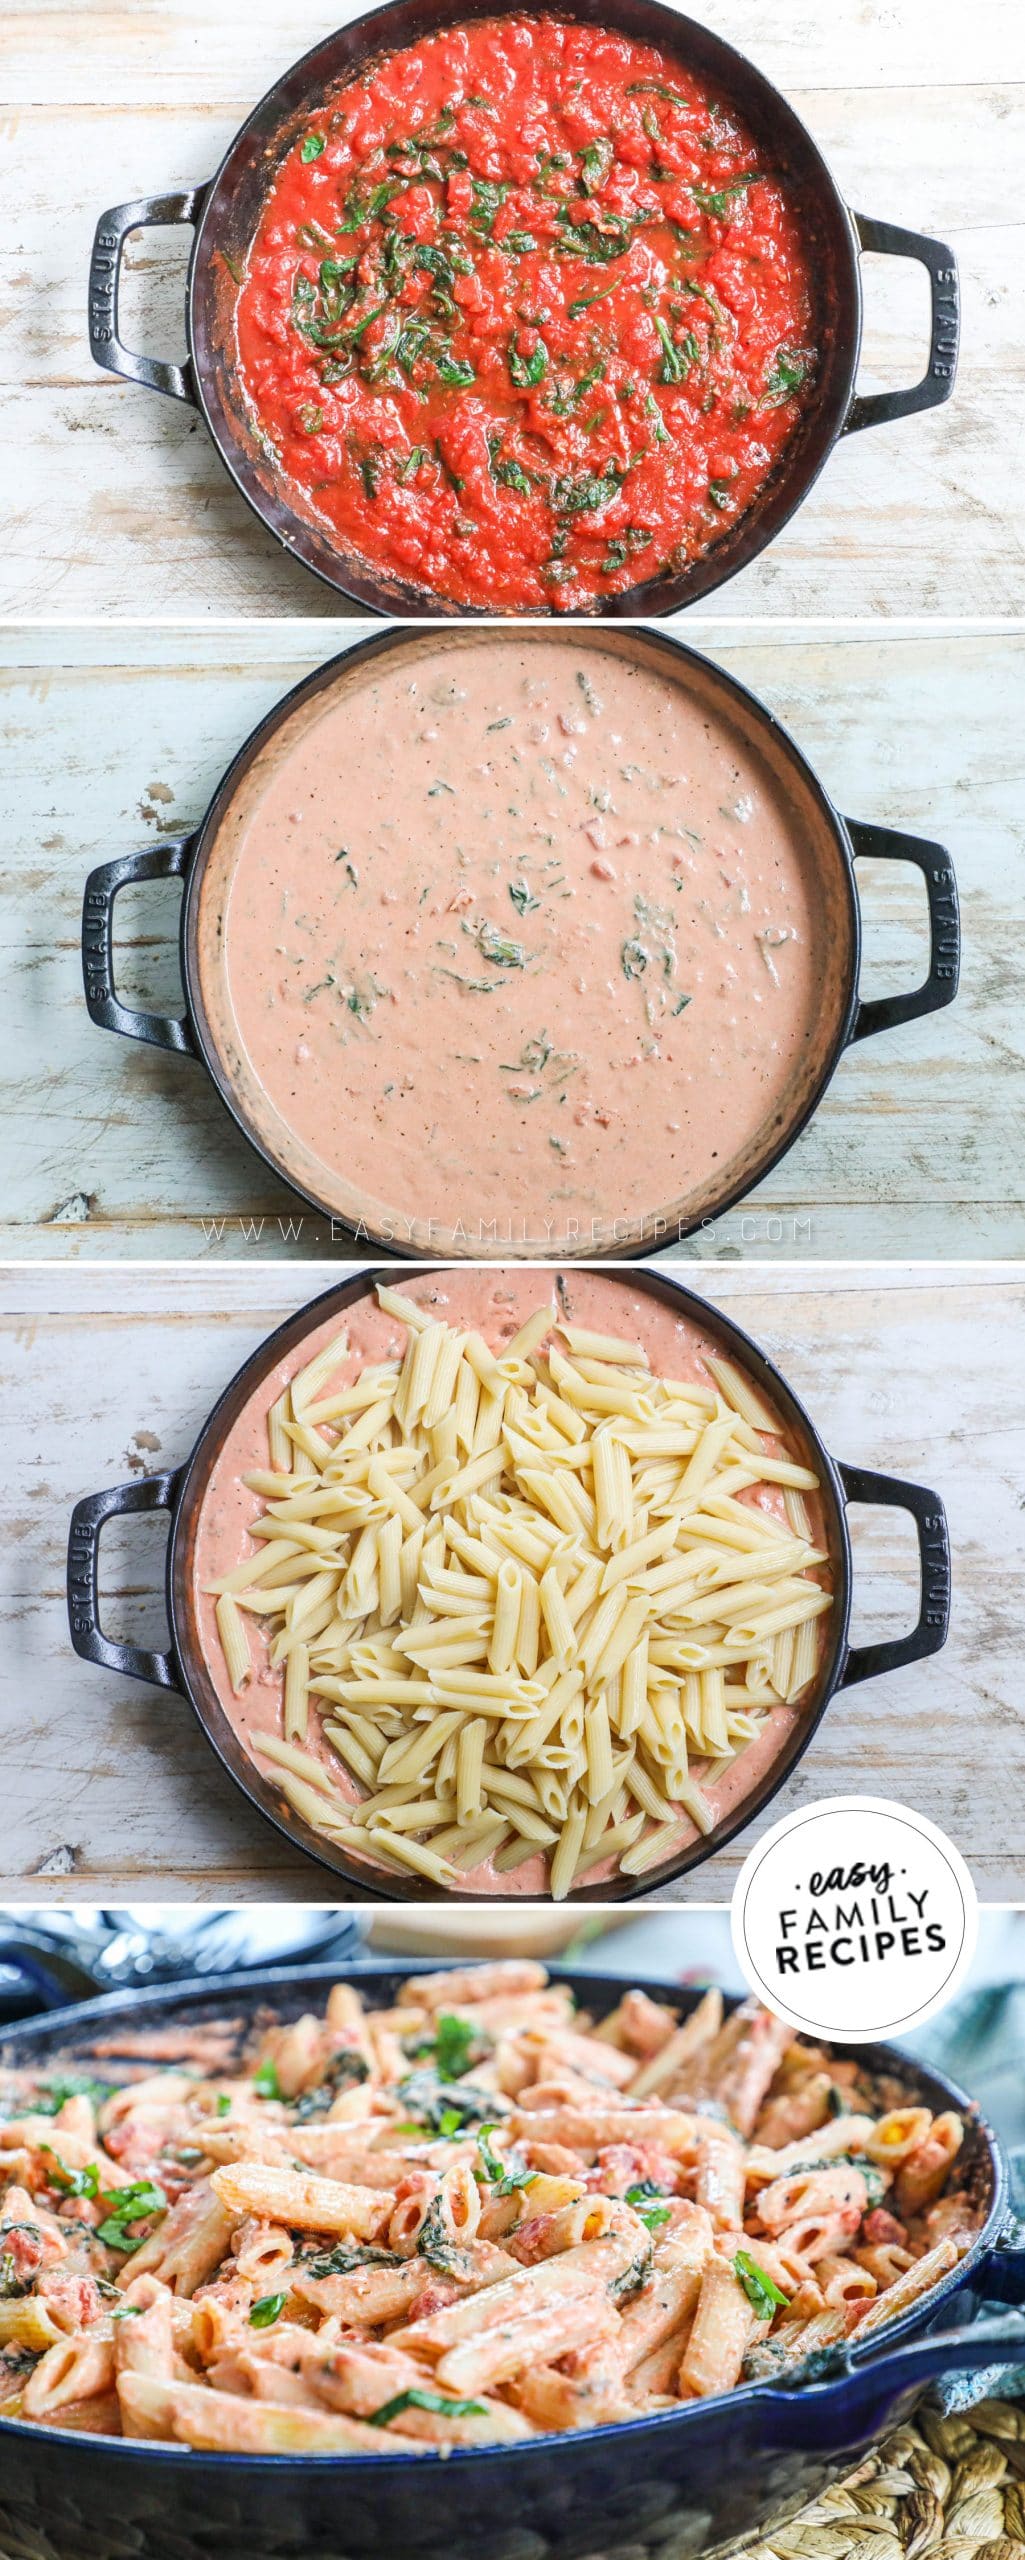 Process photos for how to make Creamy Tomato Basil Pasta- 1. Combine tomatoes with spices and basil. 2. Add cream and combine. 3. Mix in cooked pasta. 4. Garnish with fresh basil.